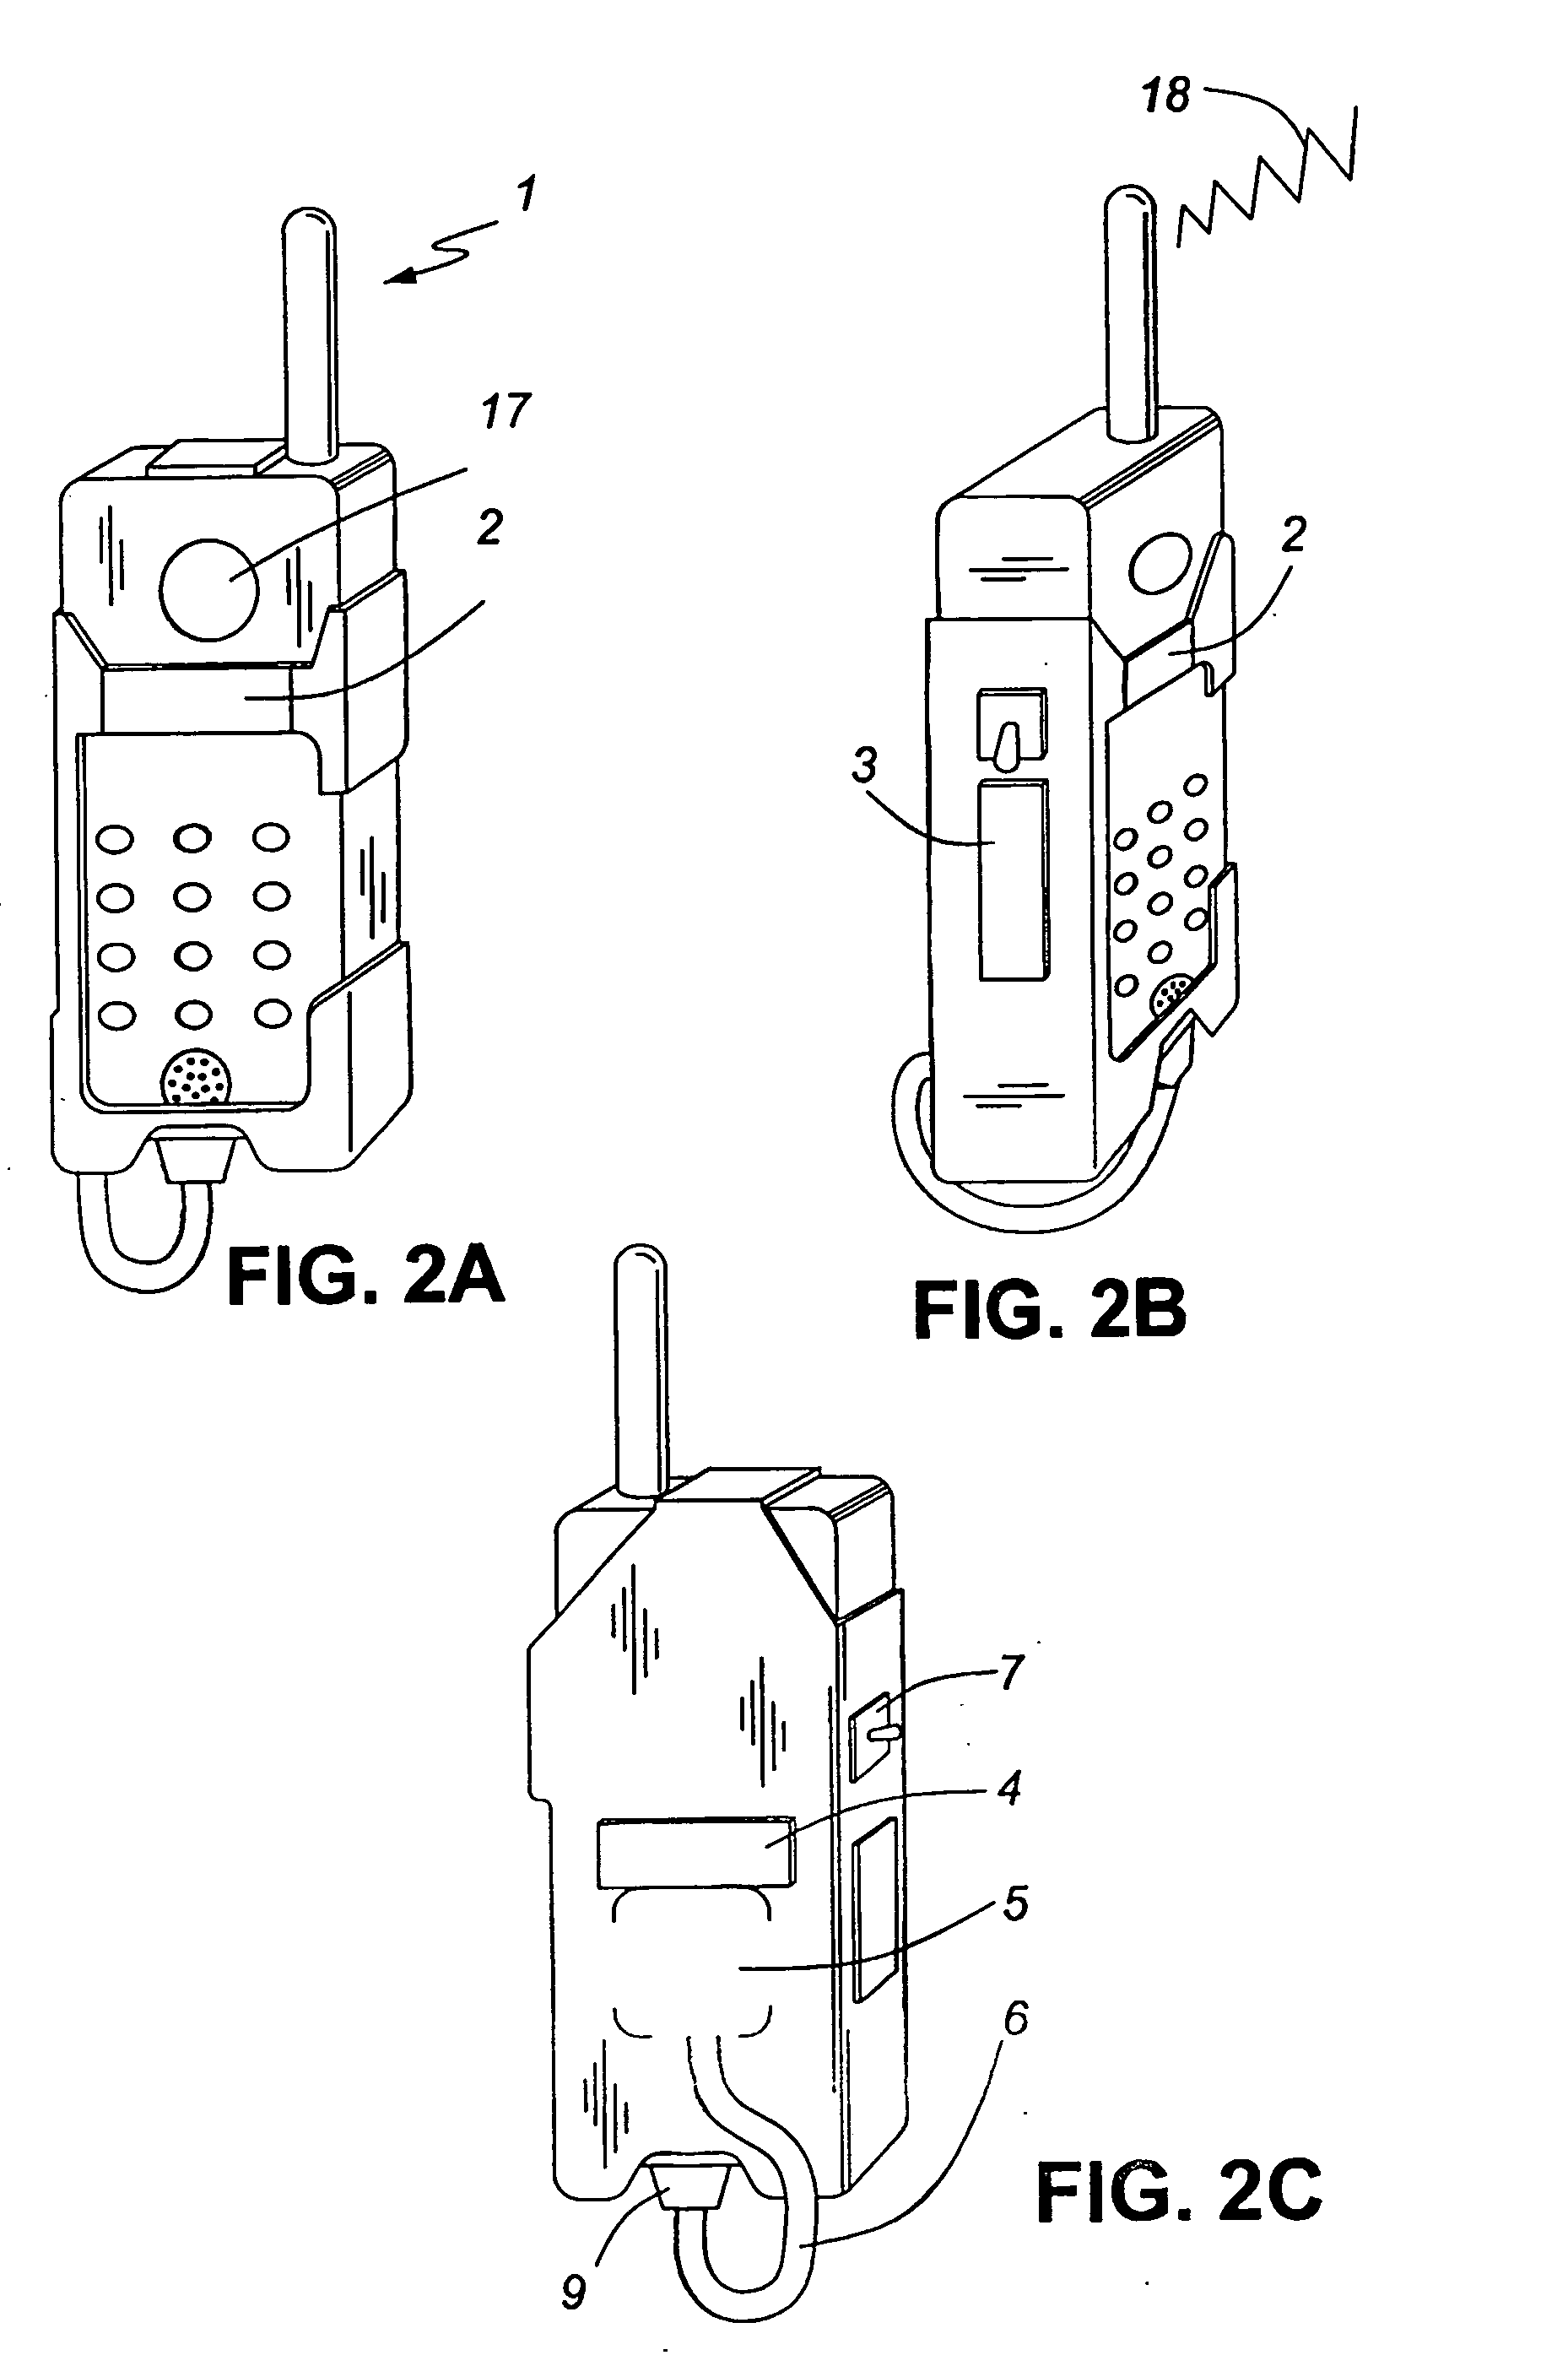 Remote monitoring of cardiac electrical activity using a cell phone device